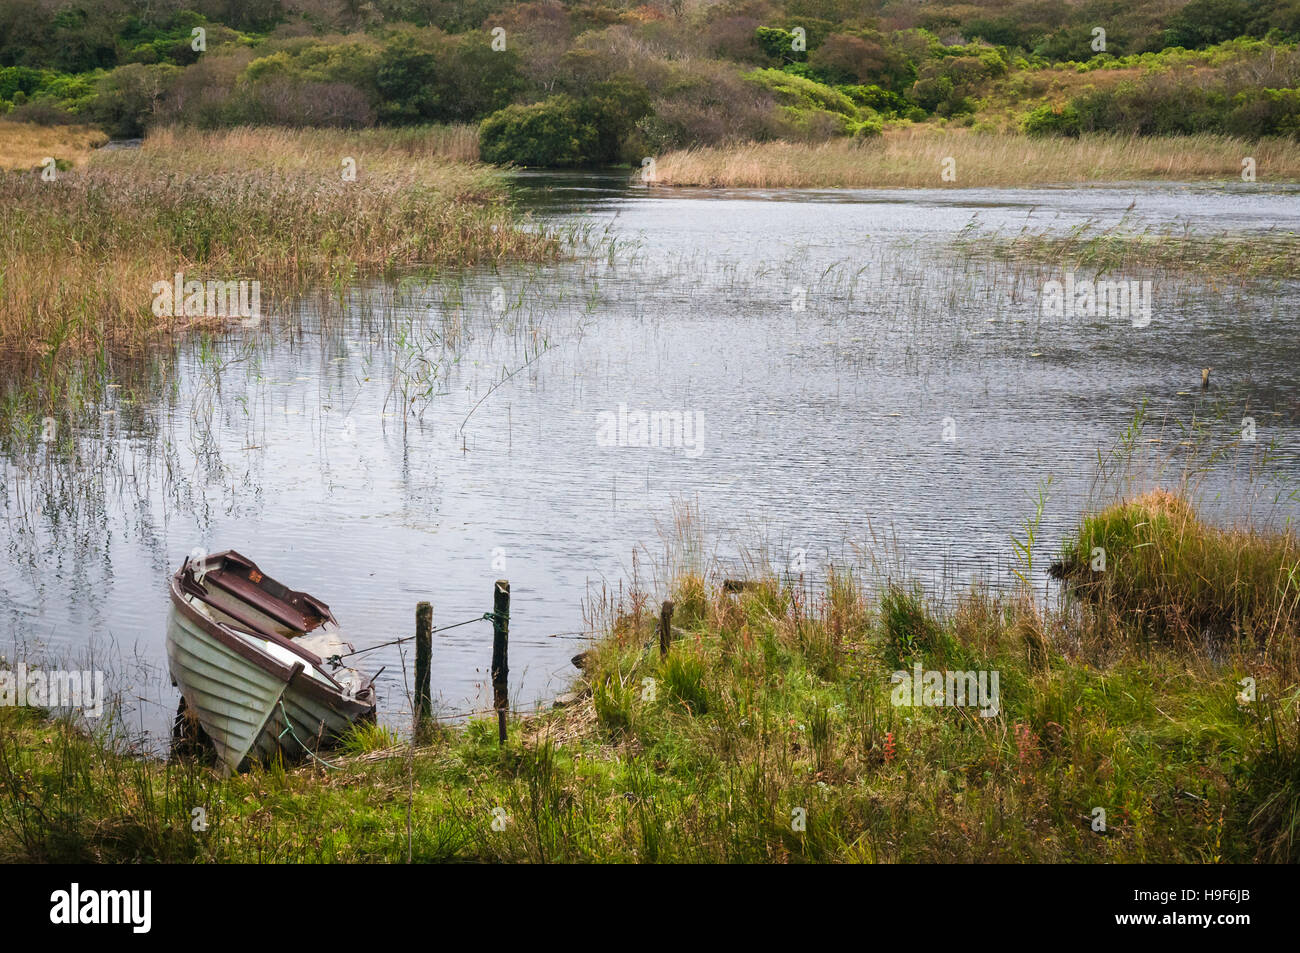 A sinking clinker built rowing boat tied up at the side of Lough Pollacappul, Connemara, Ireland. Stock Photo